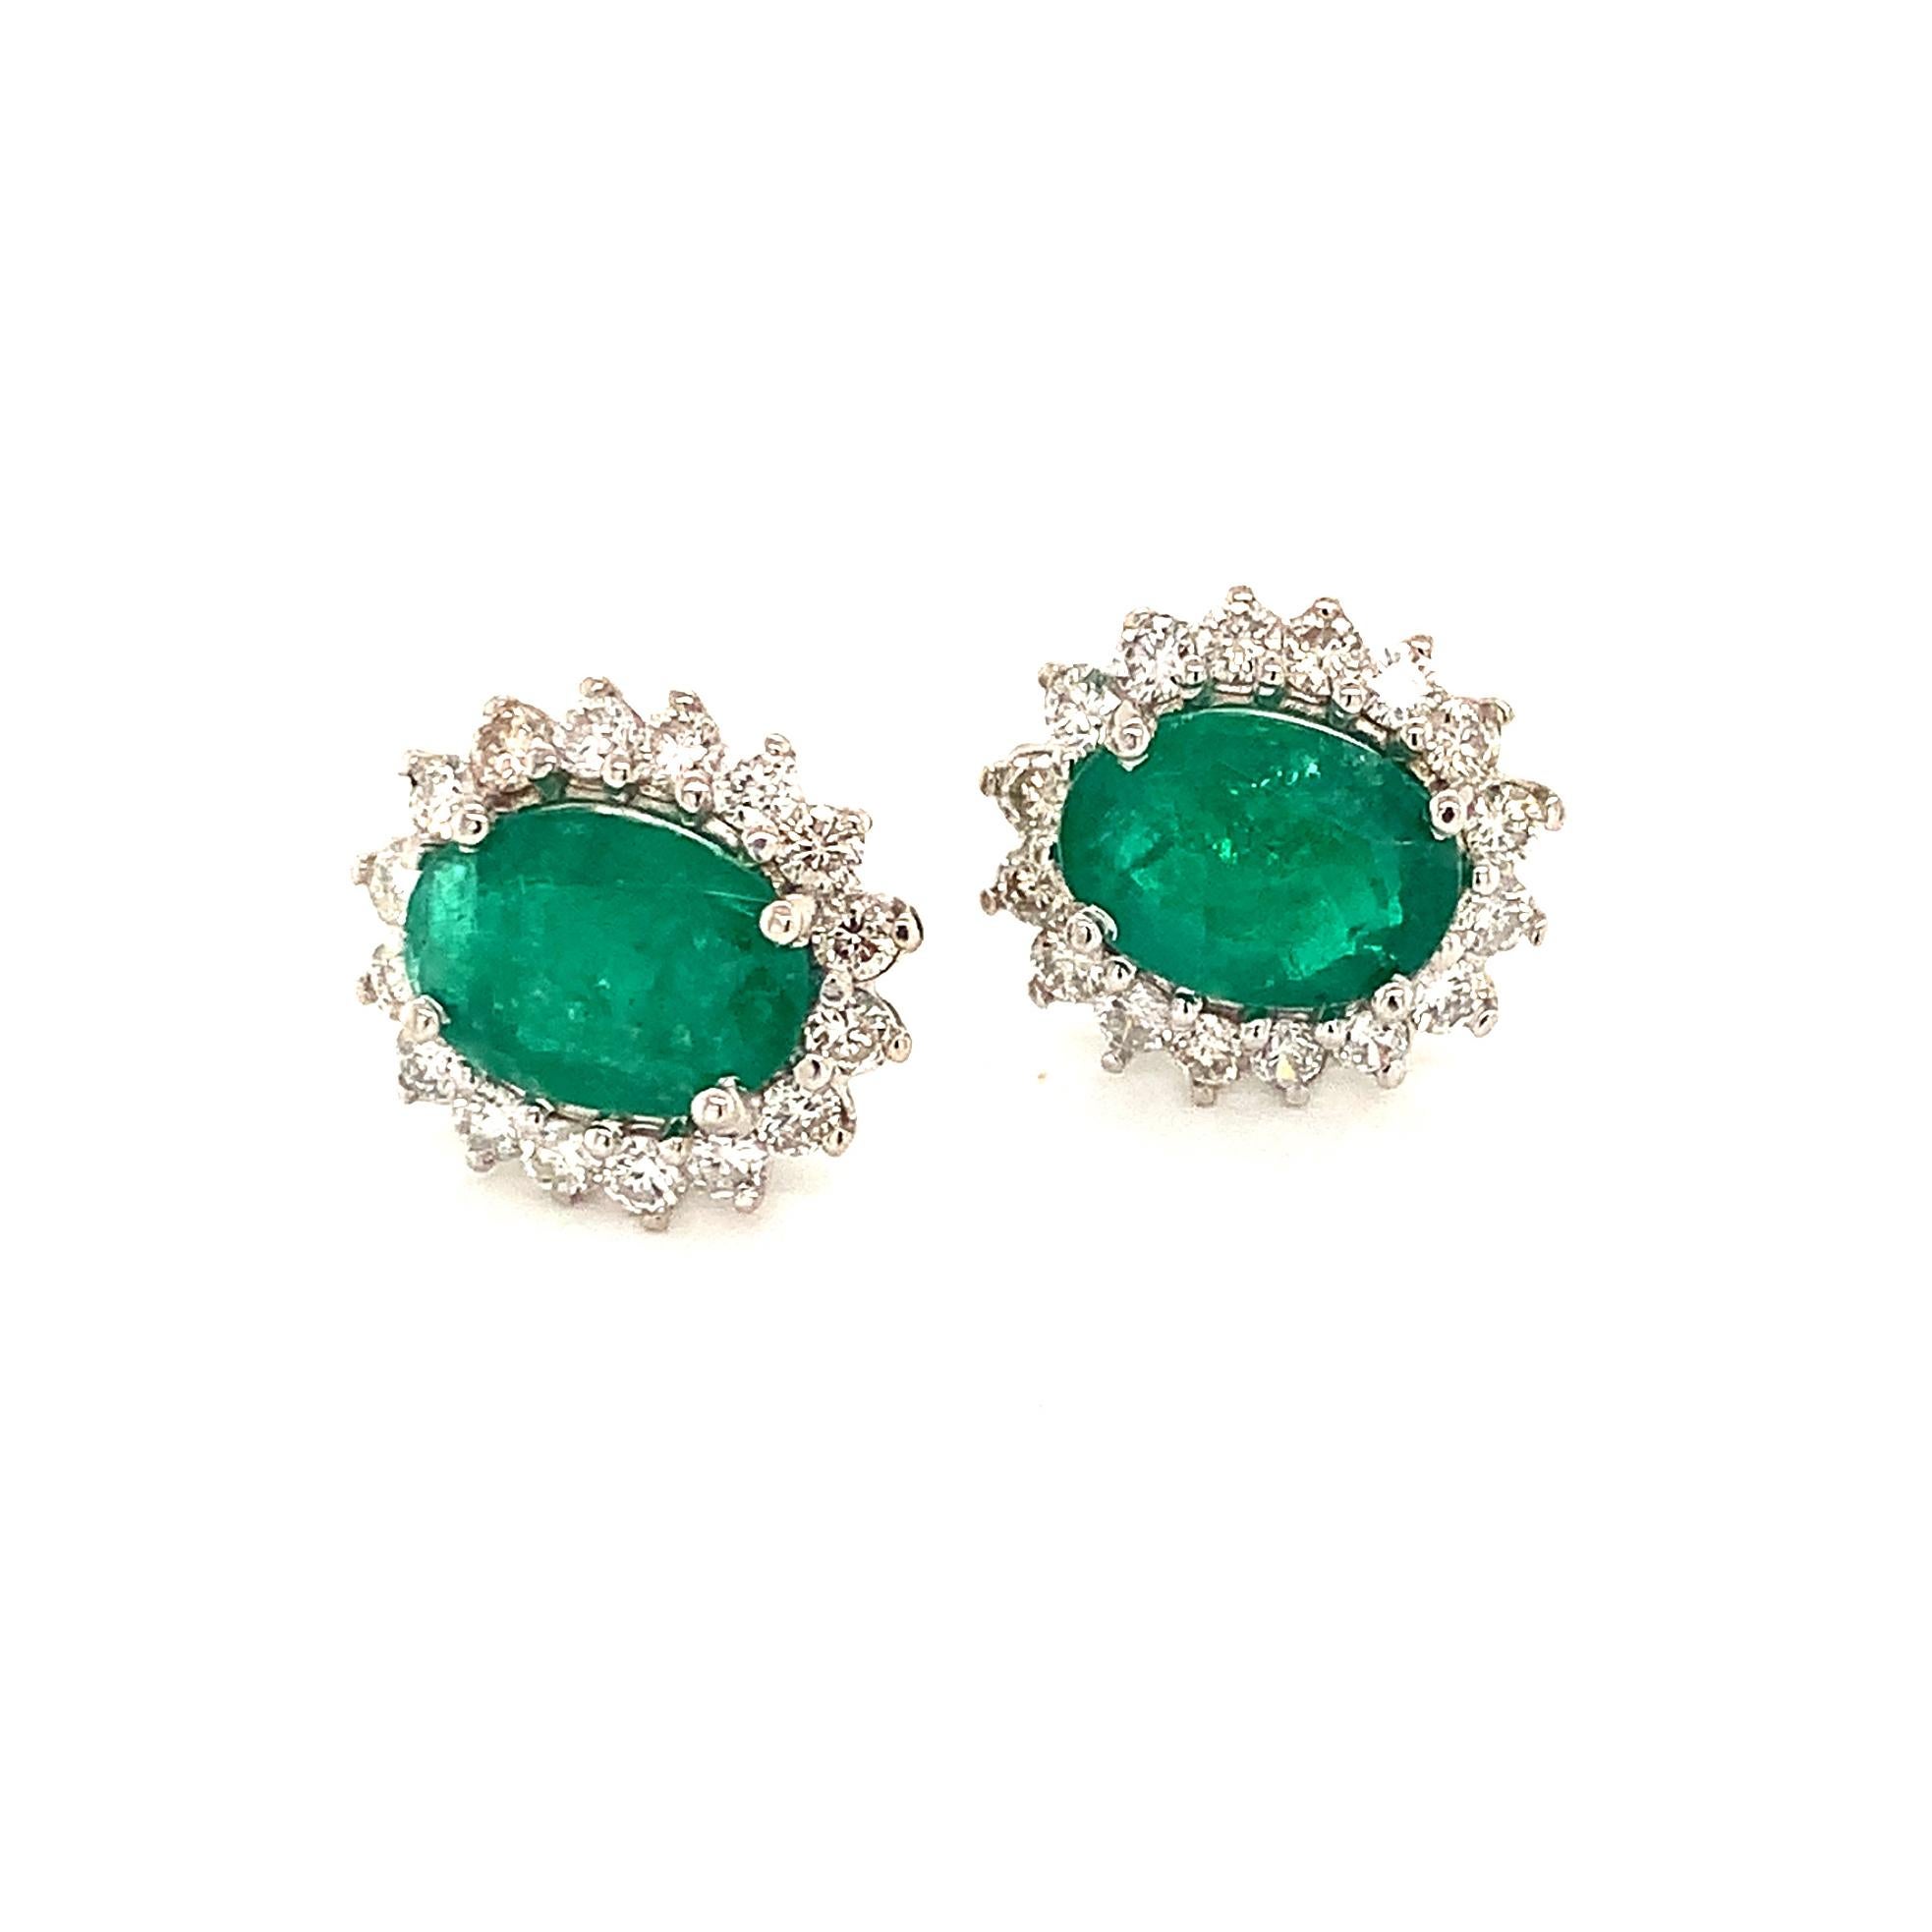 Natural Emerald Diamond Earrings 14k Gold 5.03 TCW Certified For Sale 4